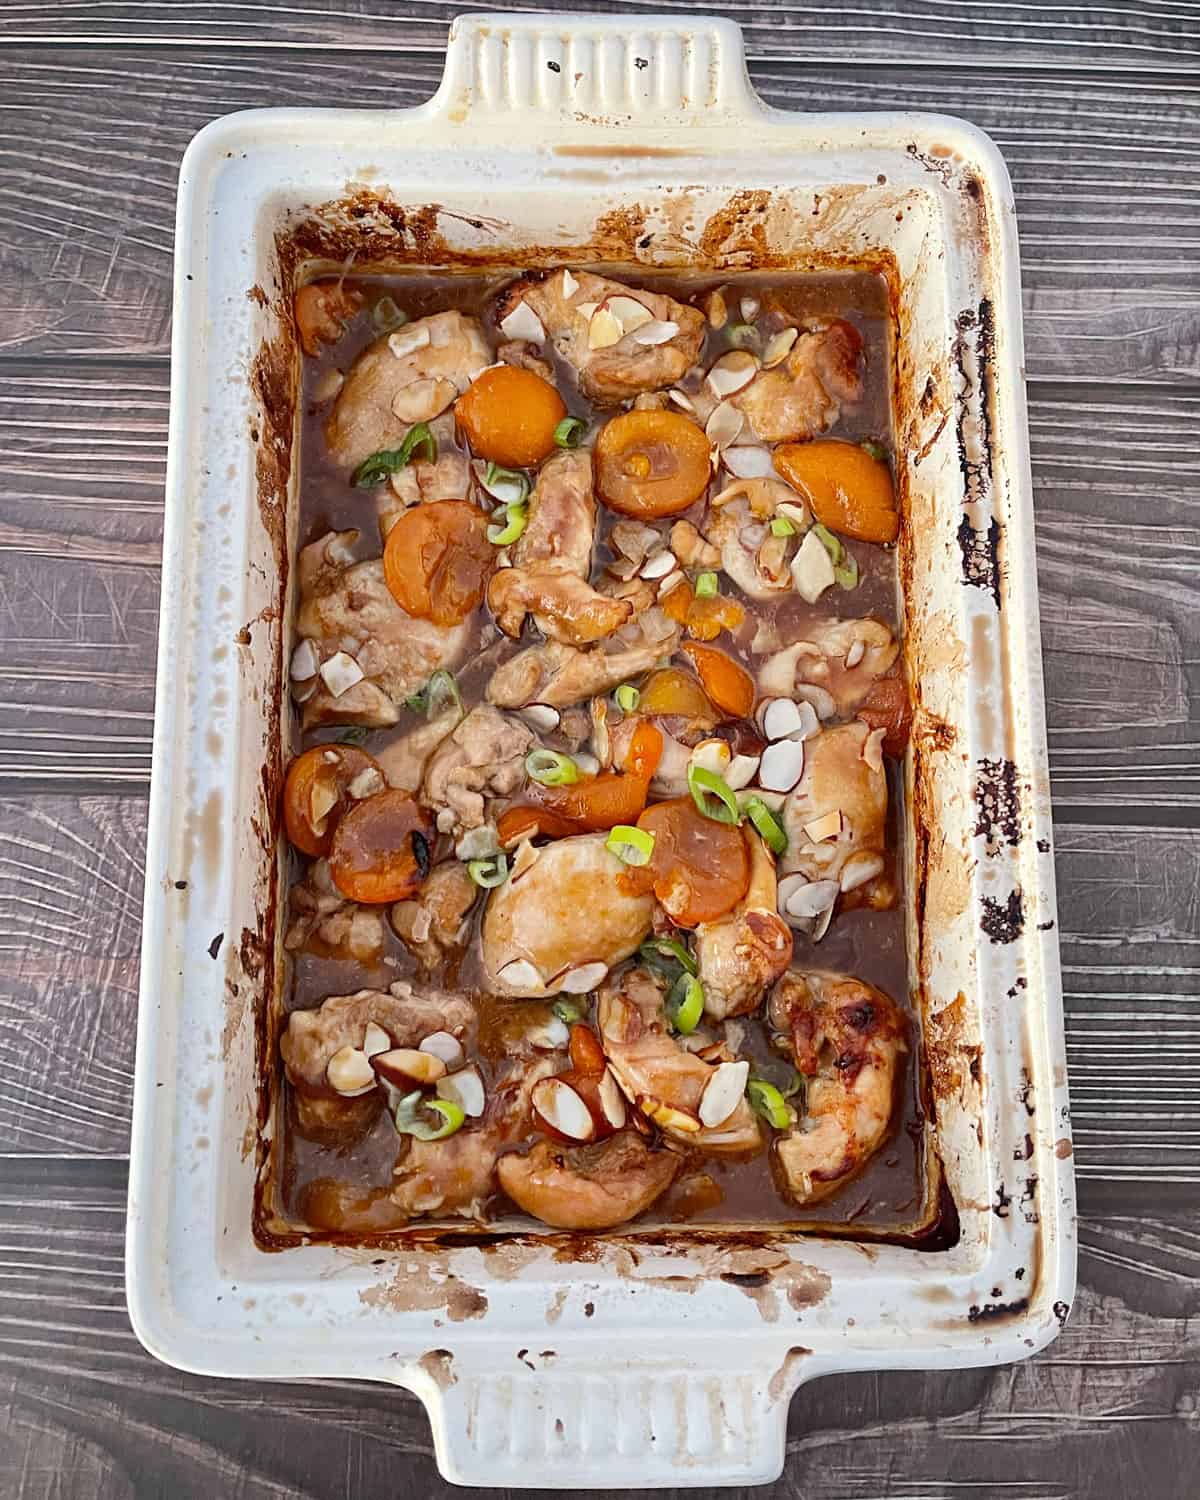 Apricot chicken tray bake after cooking in the oven.